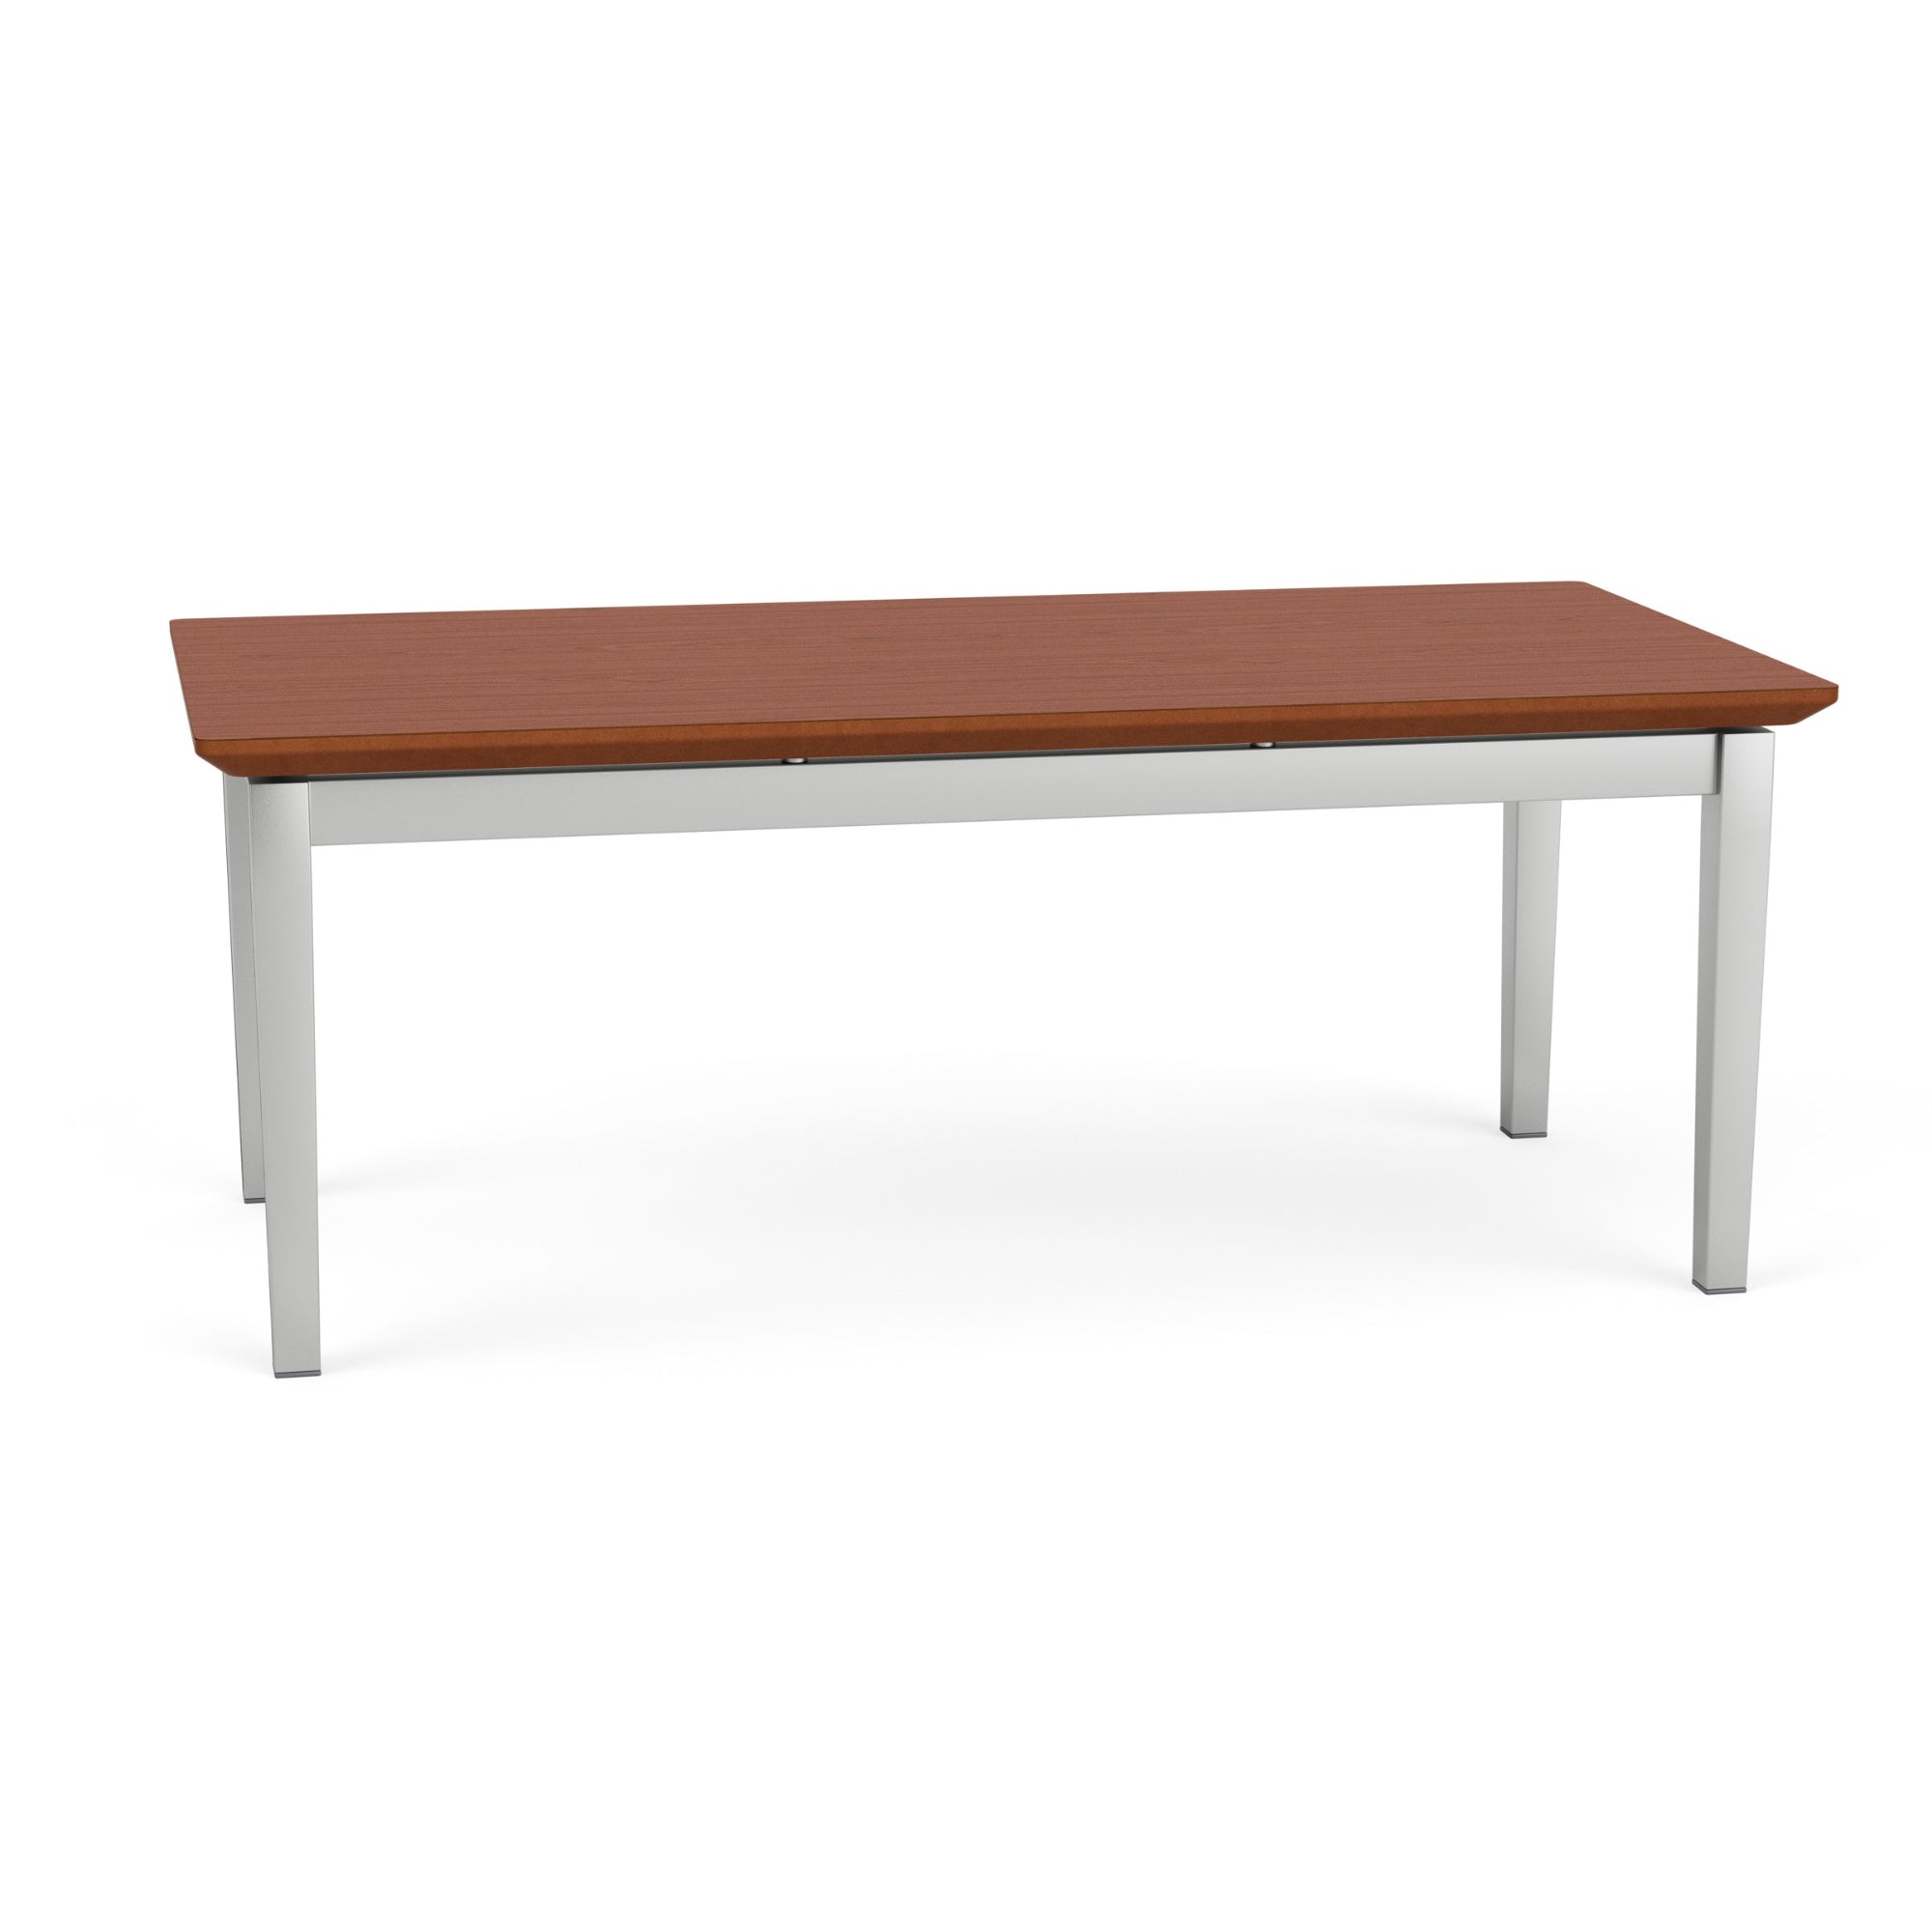 Lenox Steel Collection Coffee Table with High Pressure Laminate Top, FREE SHIPPING